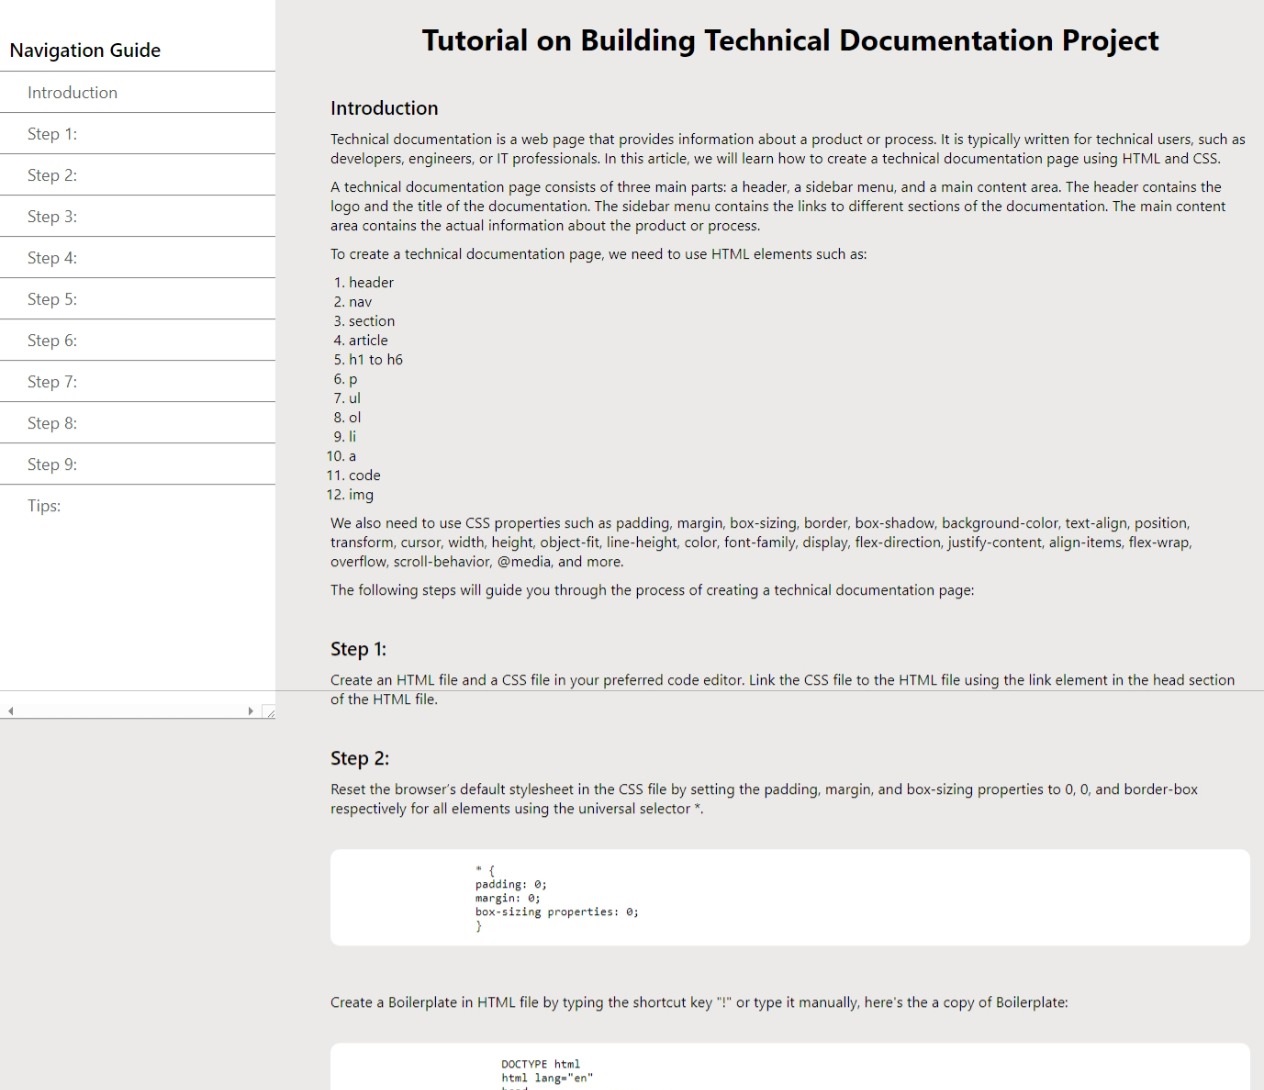 Tutorial on Building Technical Documentation Project